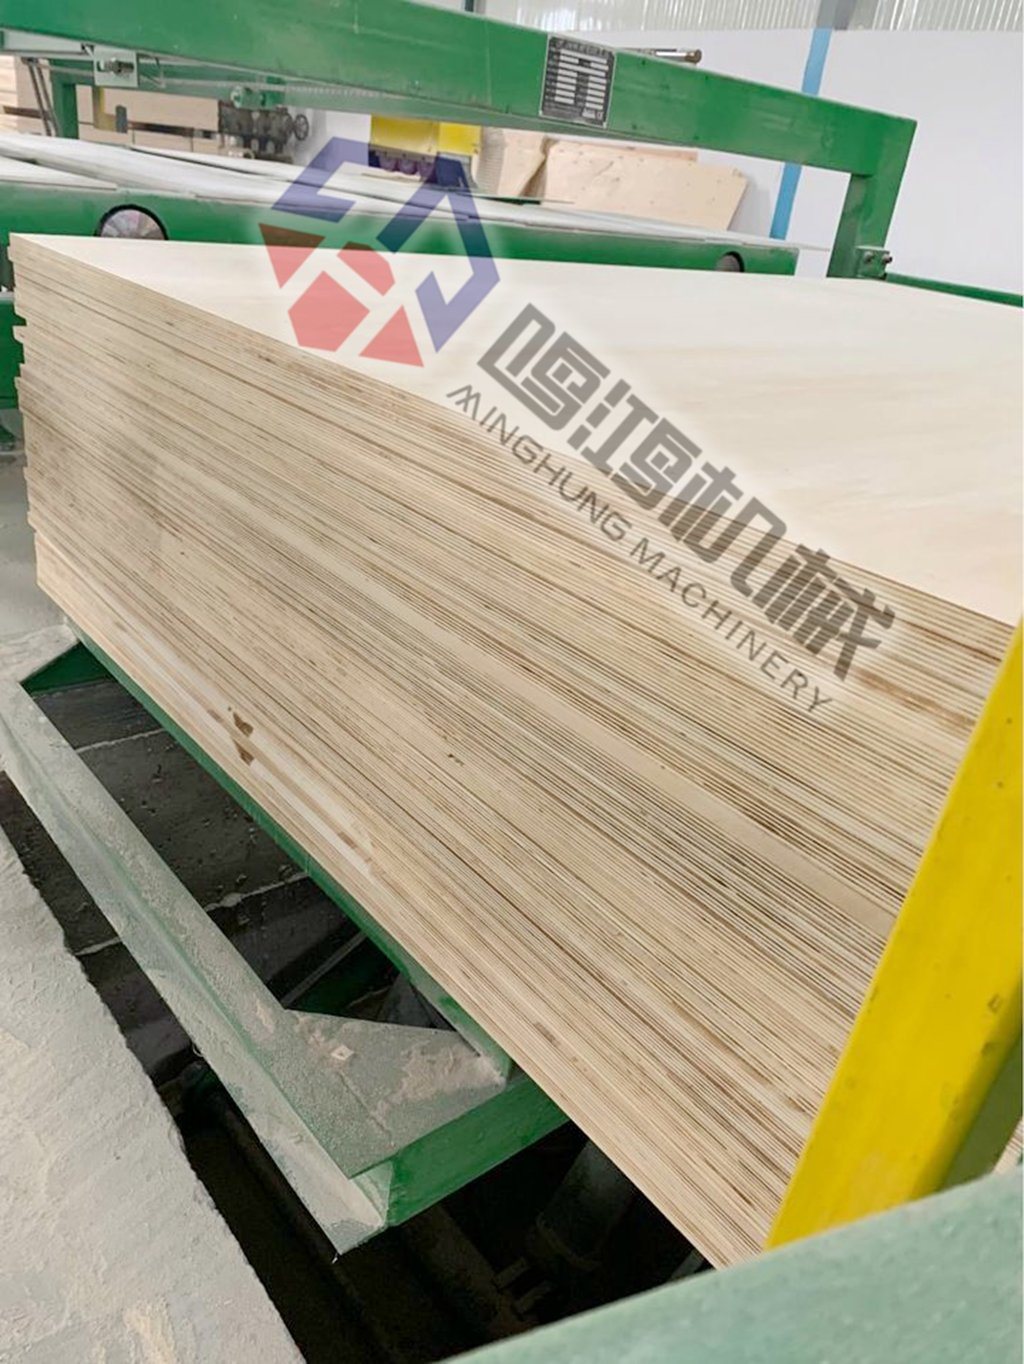 Plywood Sizing Machine for Trimming Plywood Edges